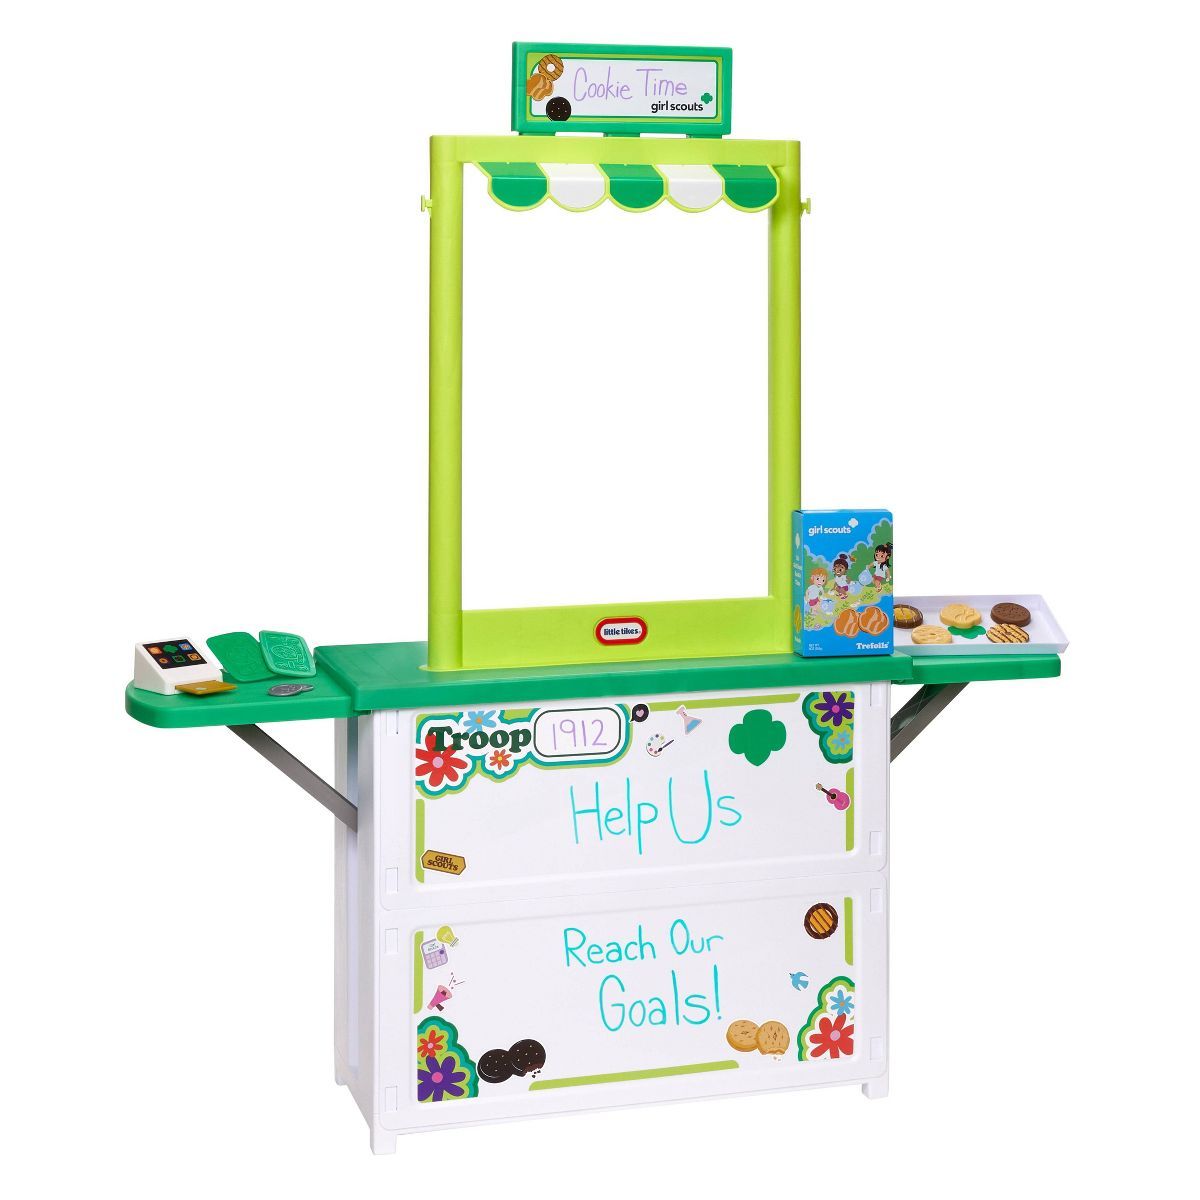 Little Tikes Girl Scout Cookie Booth - 20pc | Target